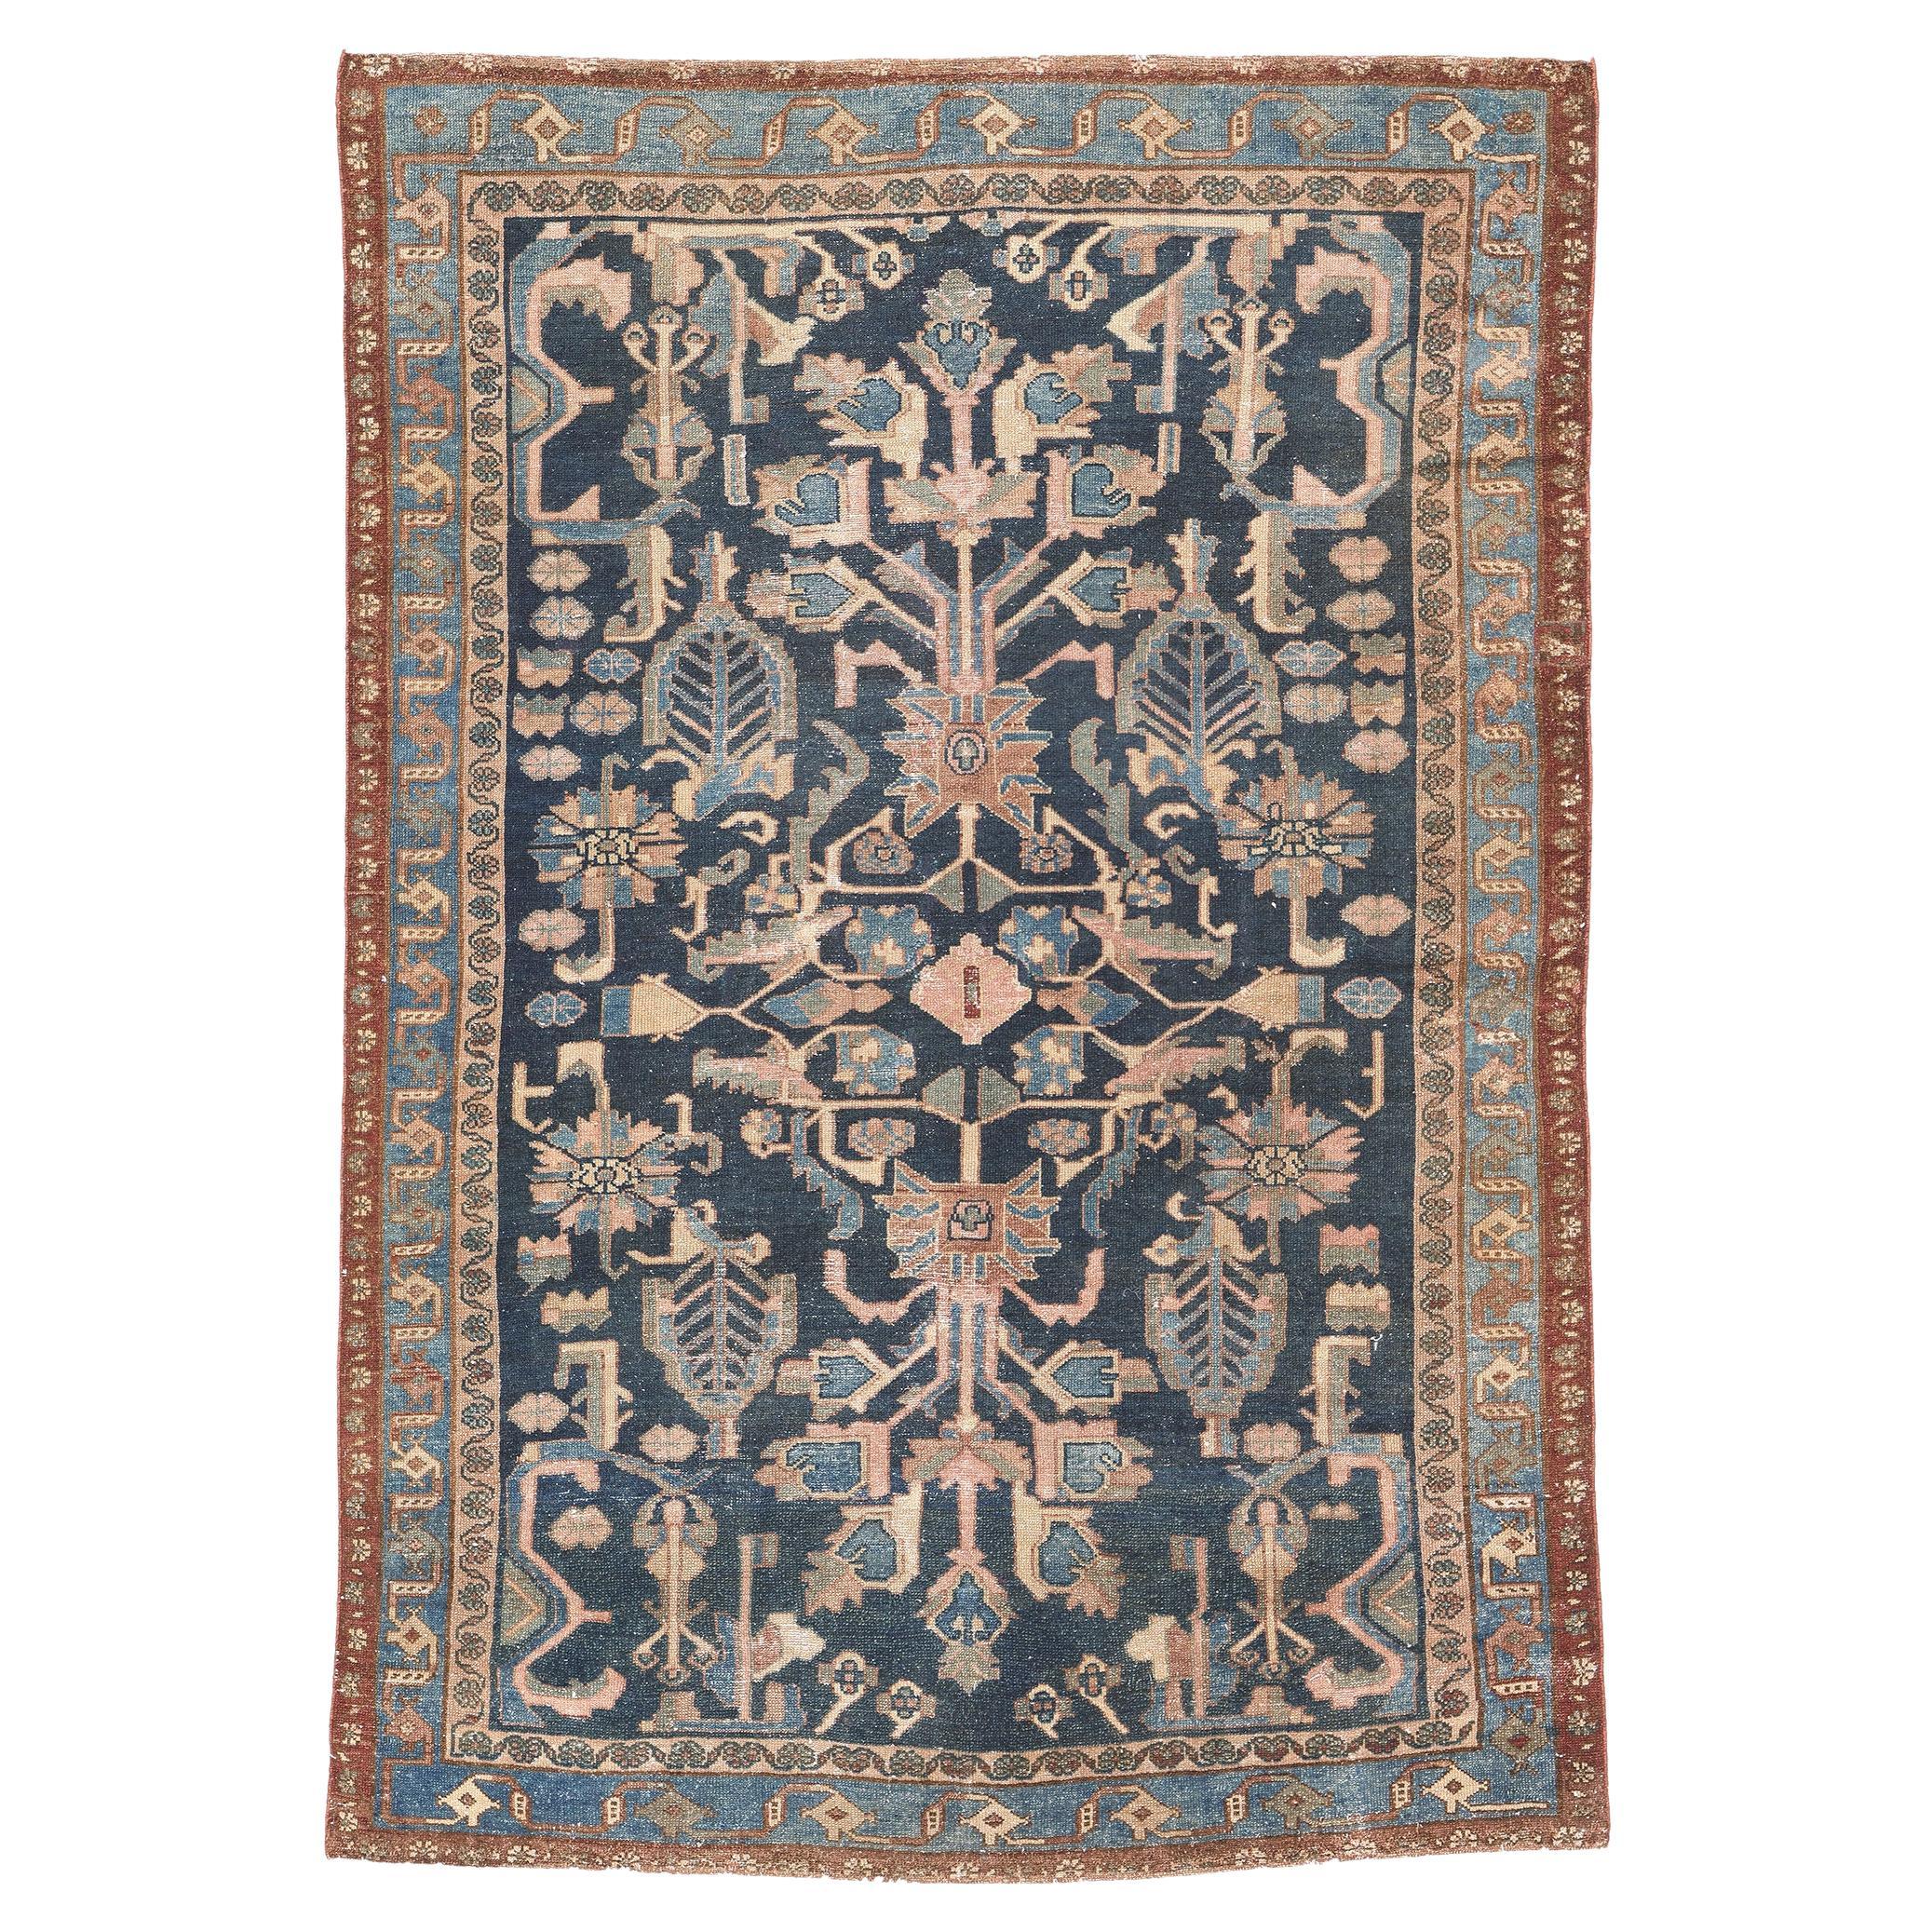 Antique Persian Malayer Rug, Sophisticated Elegance Meets Rustic Sensibility